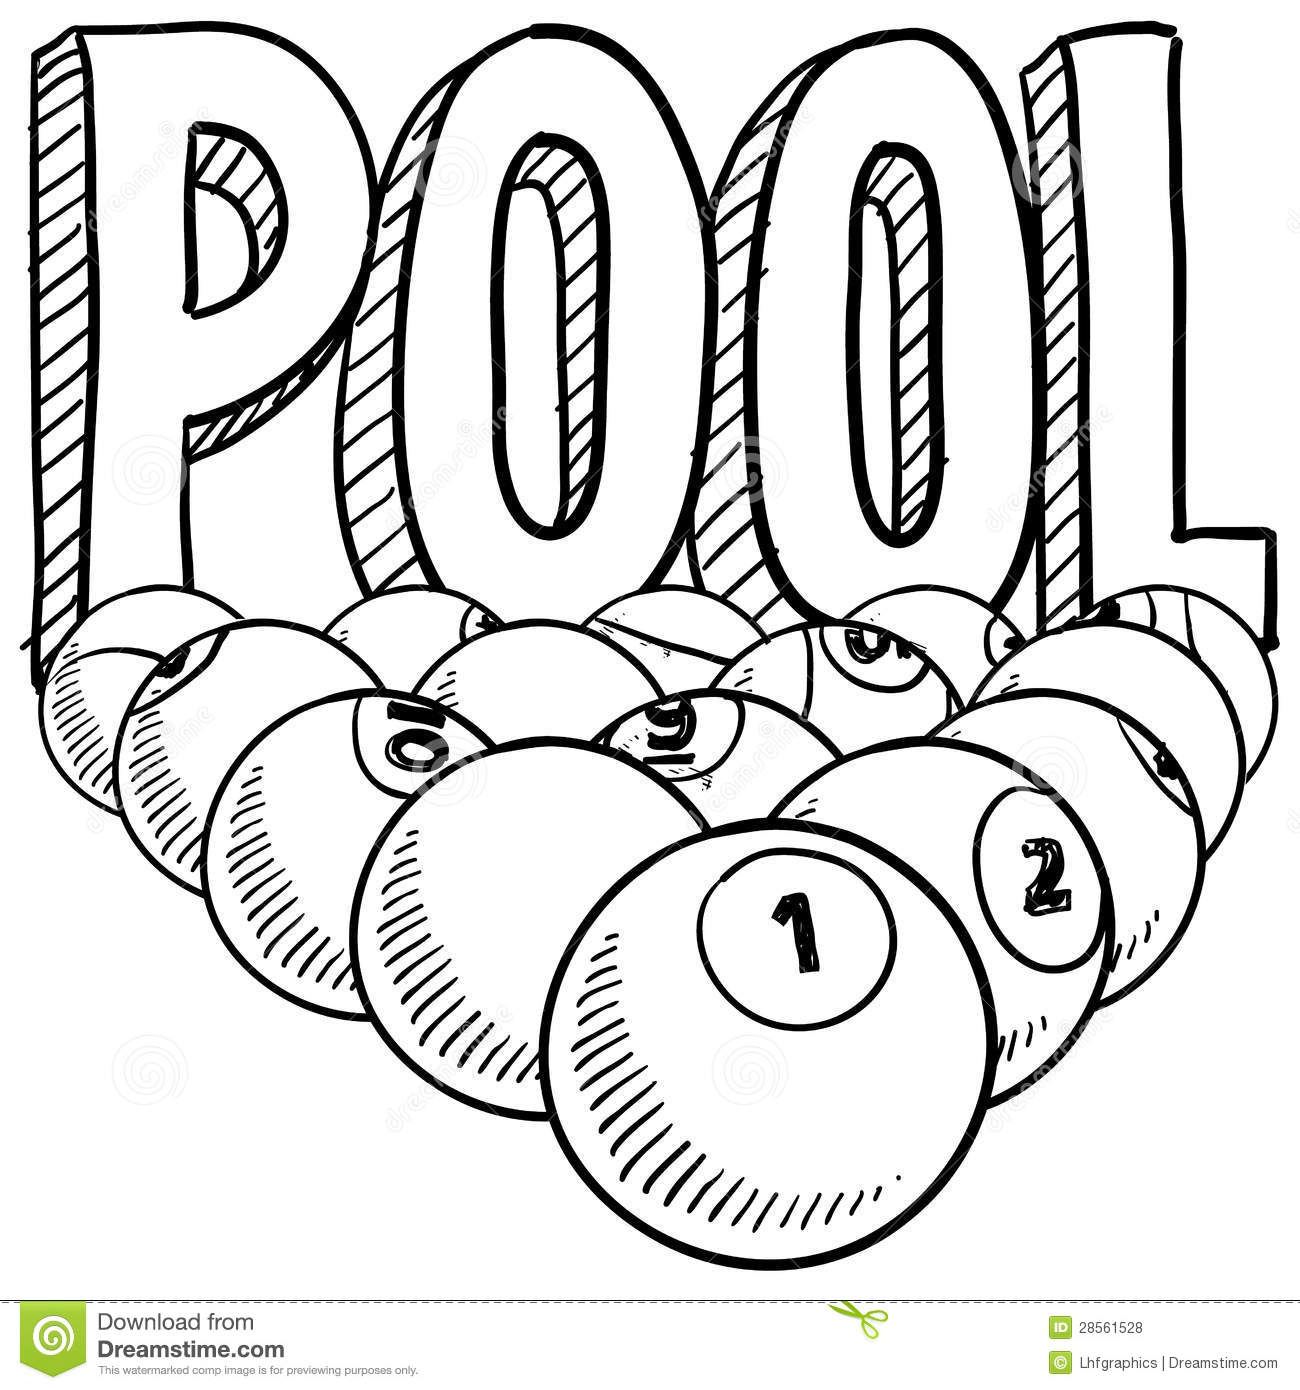 Pool Or Billiards Illustration In Vector Format Includes Text And Pool